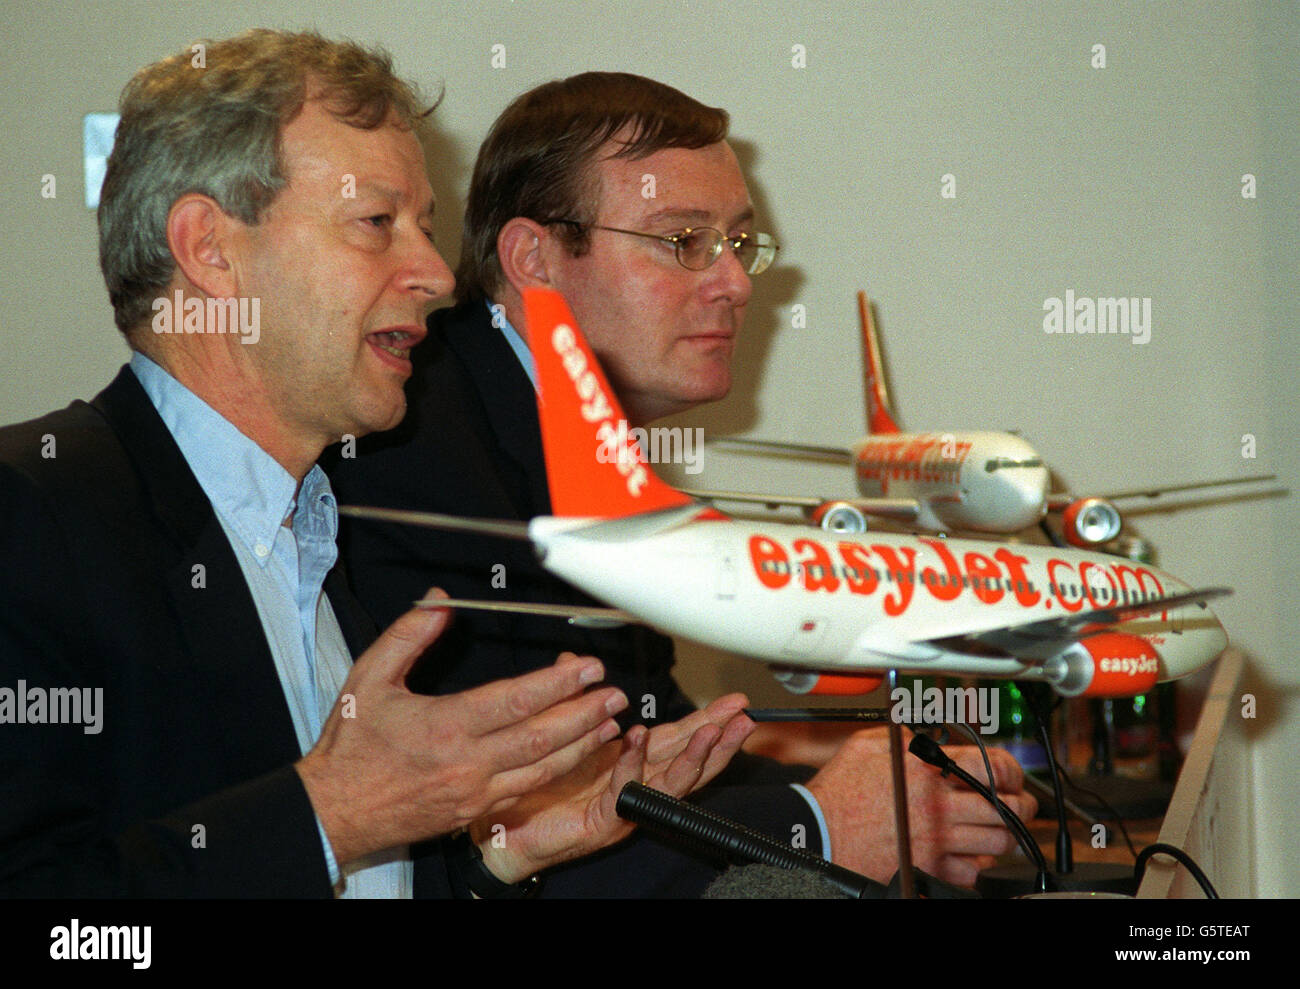 Easyjet Executives, from left: Ray Webster, Chief Executive and Finance Director Chris Walton at a news conference in London, where they confirmed their 374 million pound takeover of rival Go. * ... The takeover will see Go's brand disappear and is likely to intensify competition between low-cost airlines. The deal, which is yet to be approved by easyJet's shareholders, will take the airline past Ryanair as Europe's biggest low-cost operator. EasyJet also agreed a deal with BA to buy its German subsidiary Deutsche BA. Stock Photo